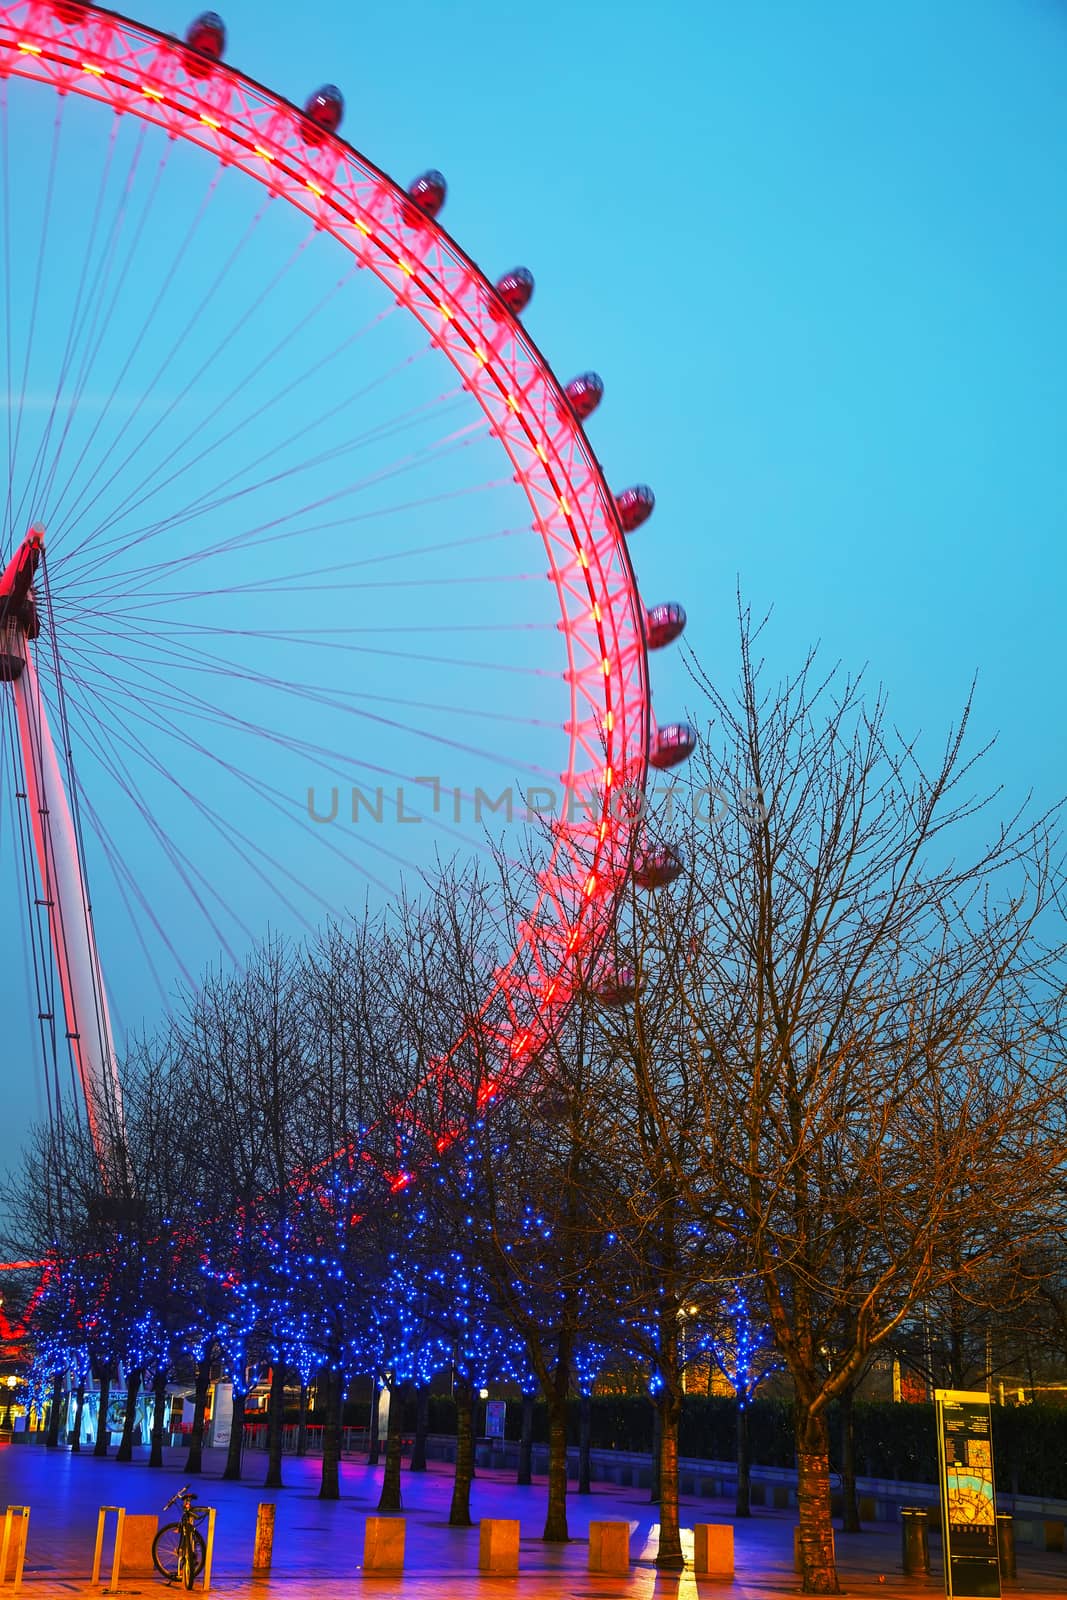 The London Eye Ferris wheel in the evening by AndreyKr